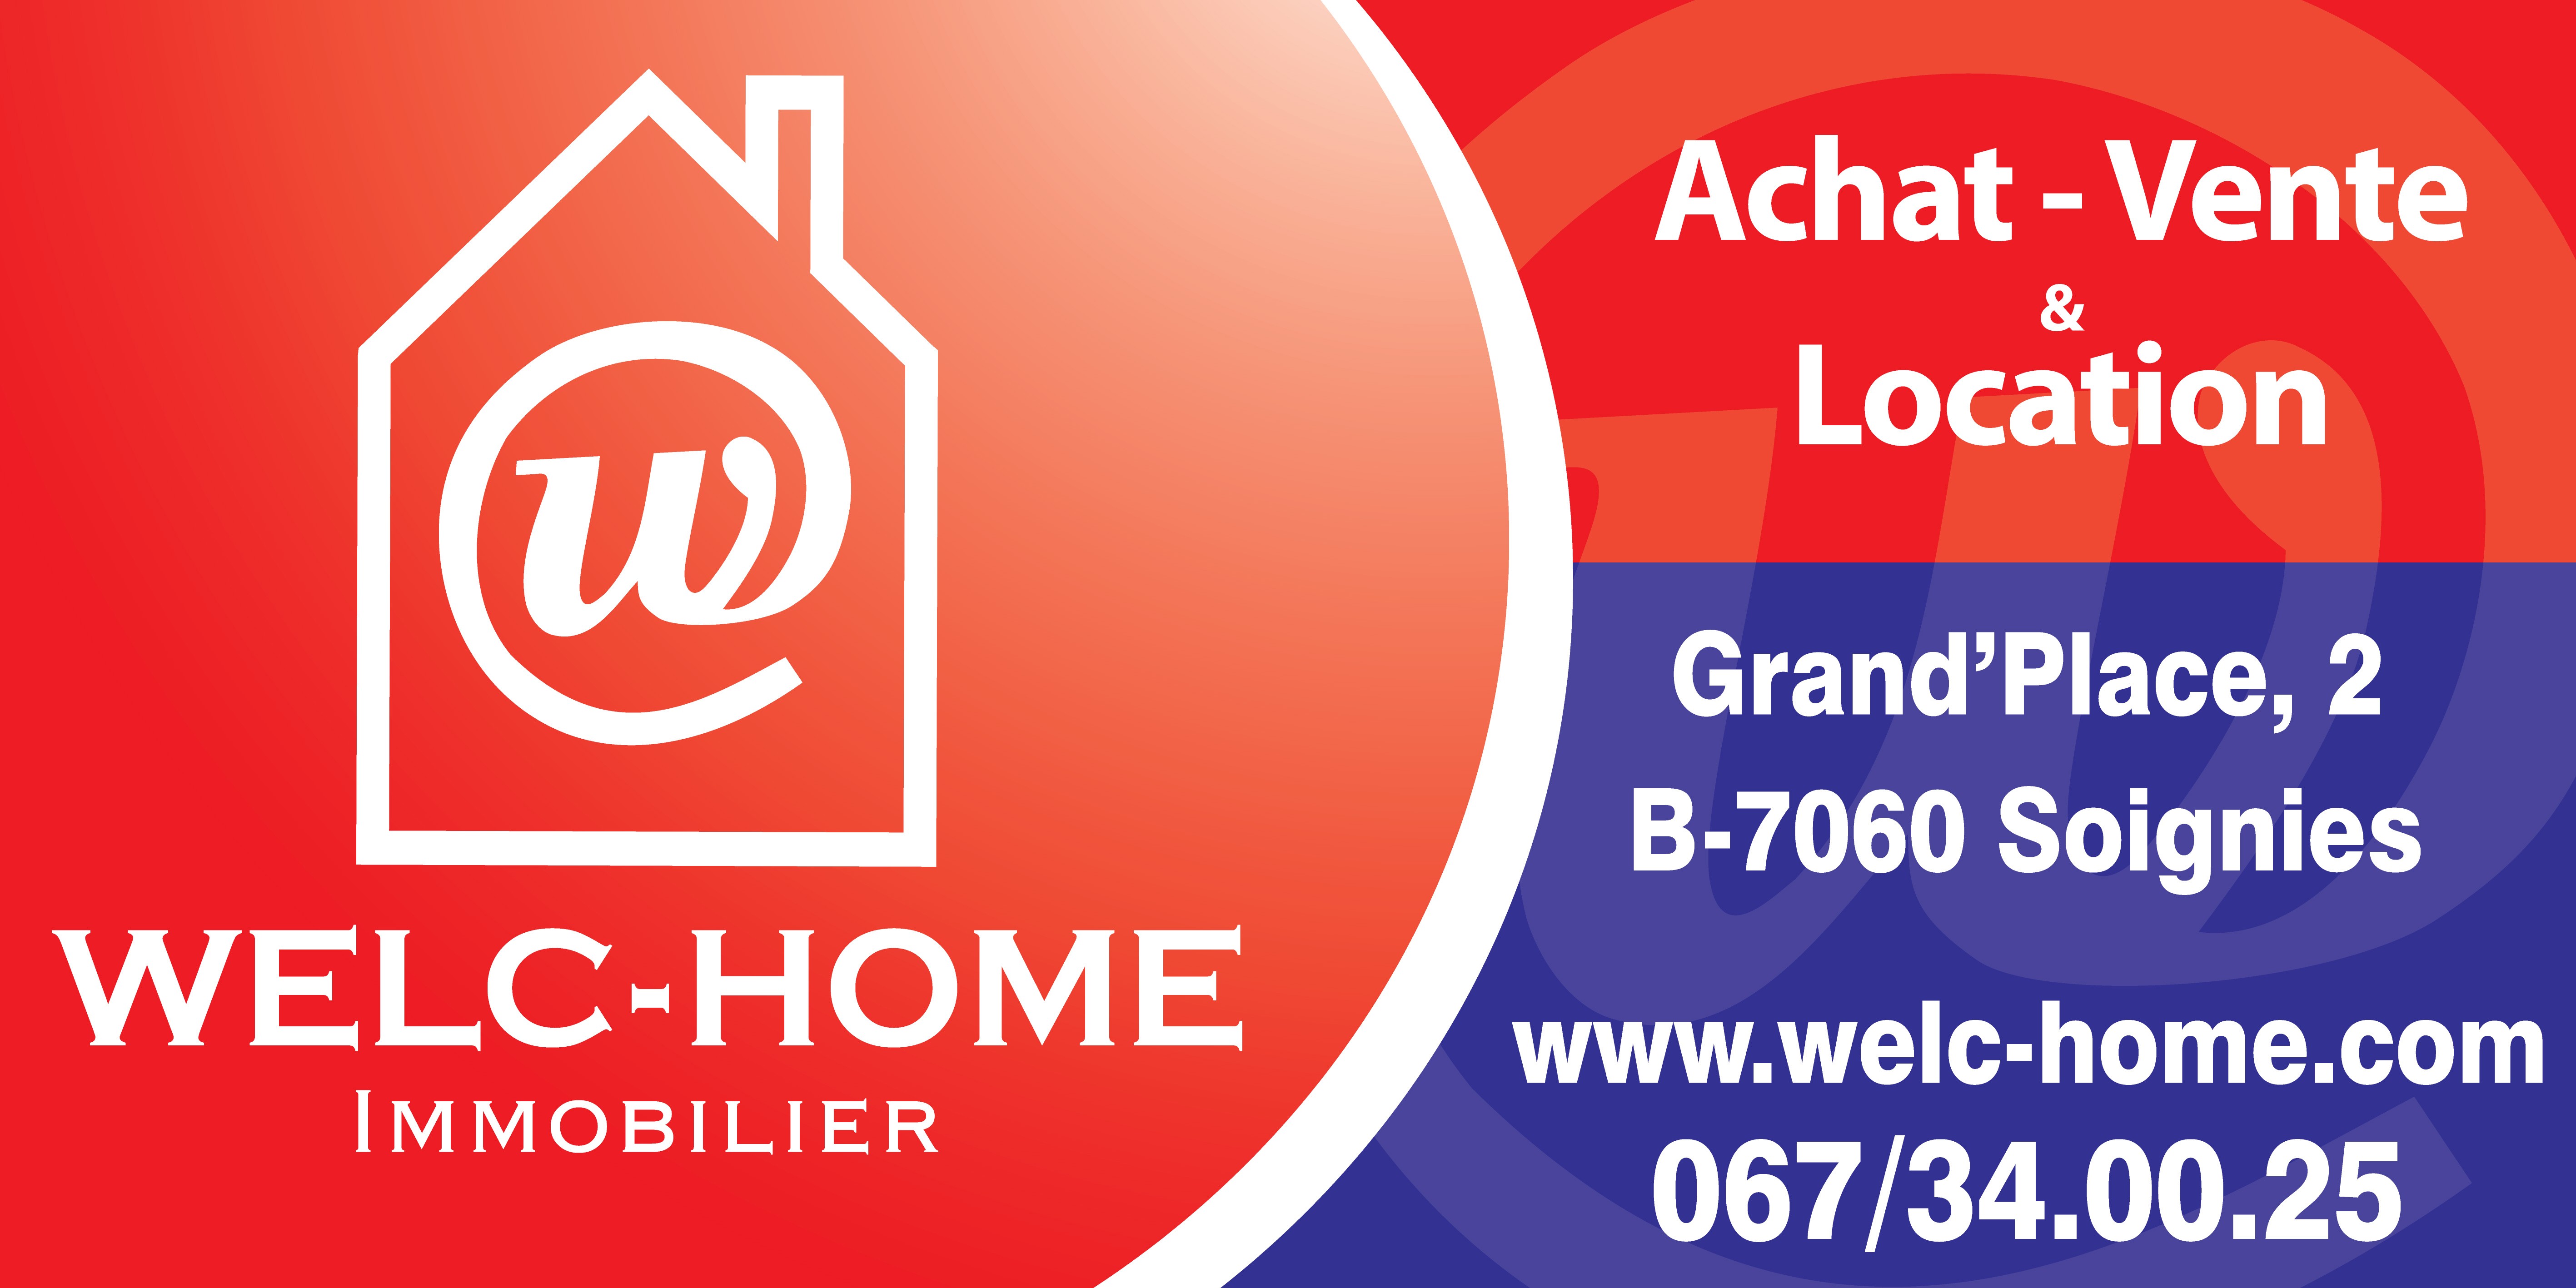 WELC-HOME immobilier